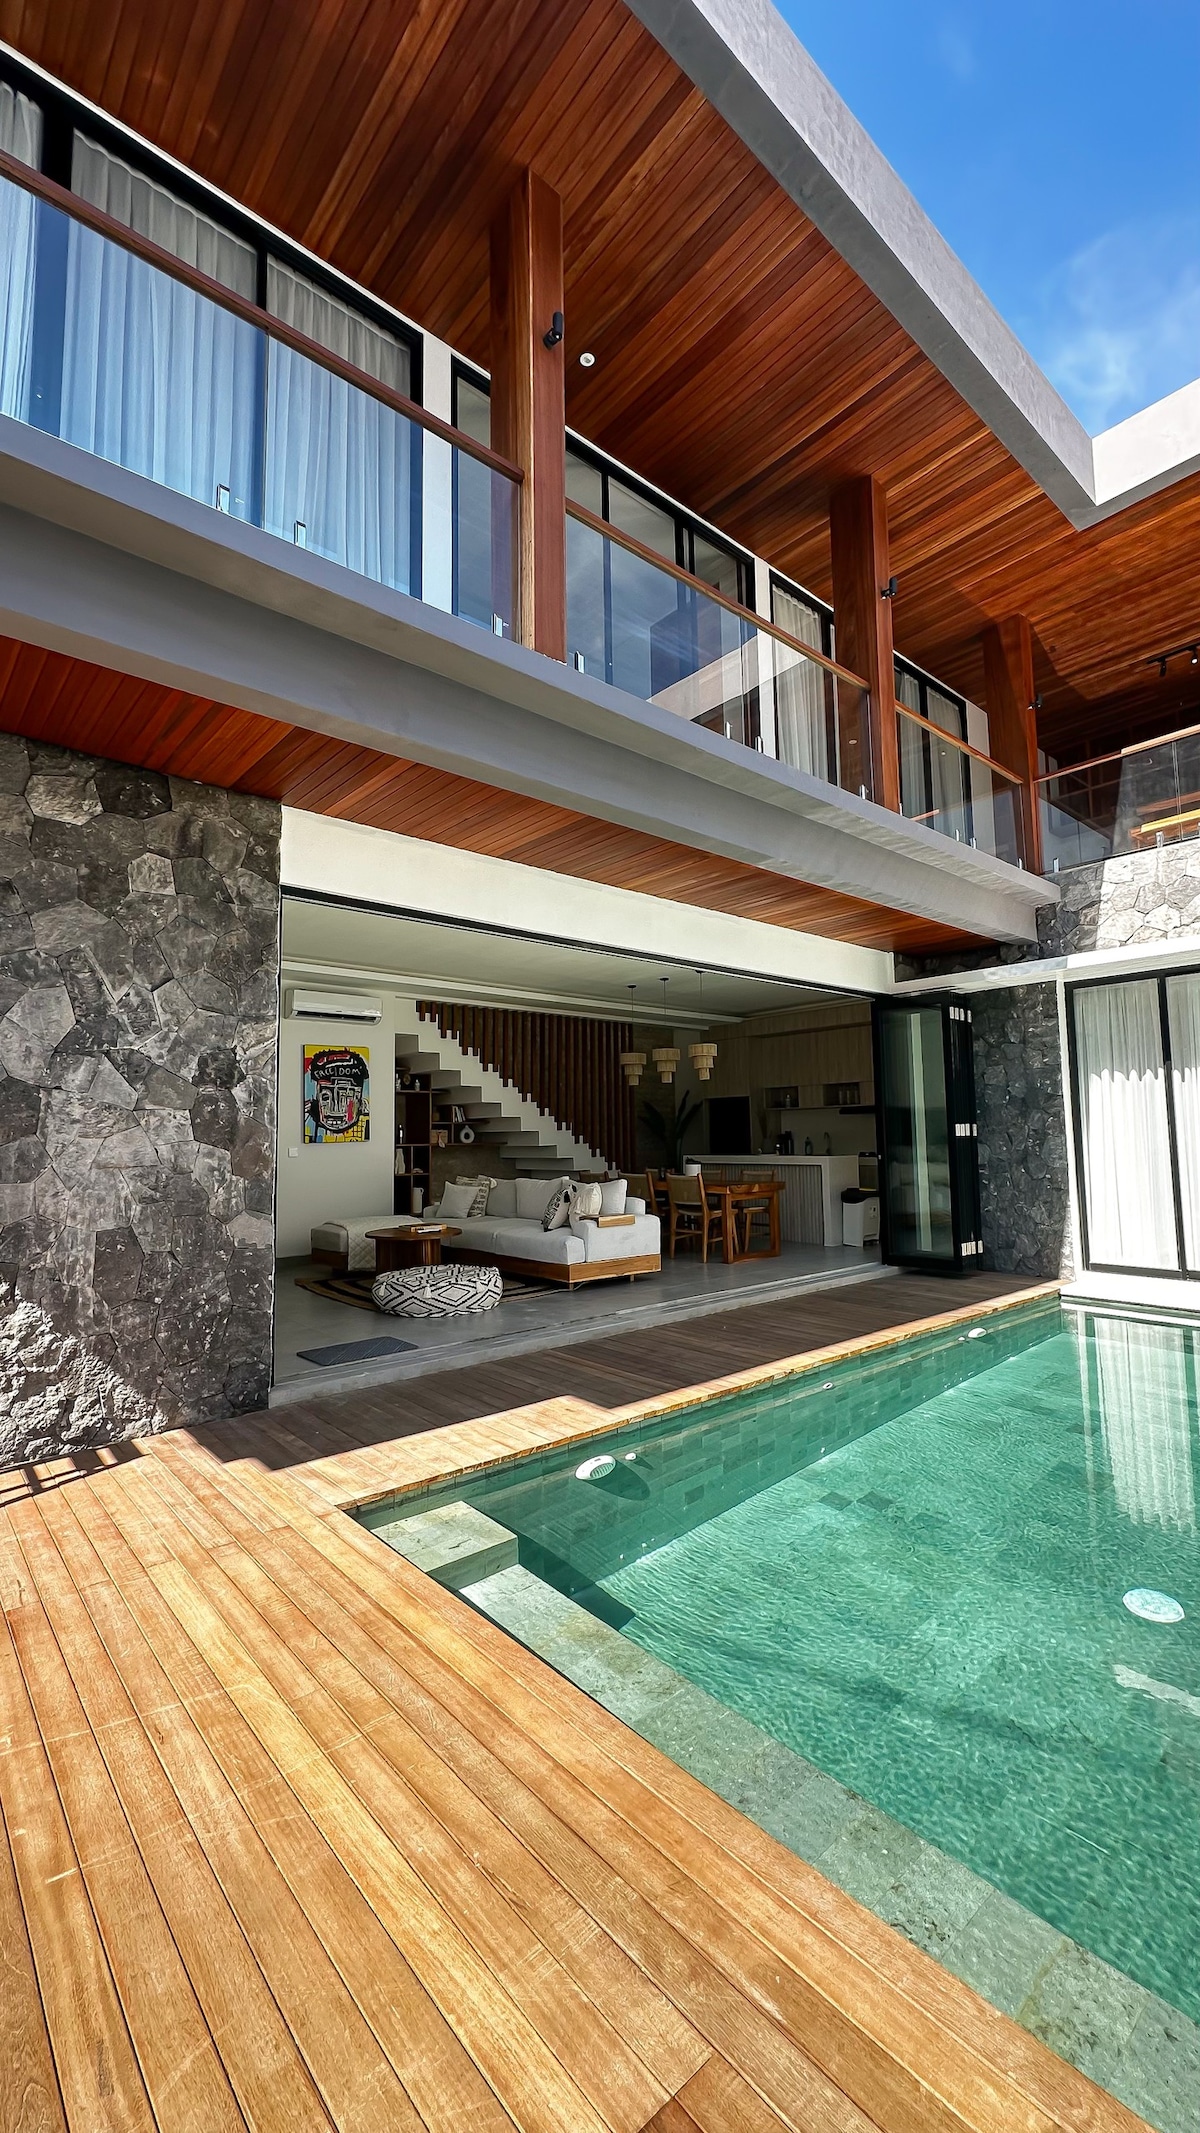 New Villa in Canggu 3 Bed, 3 Bath with Large Pool